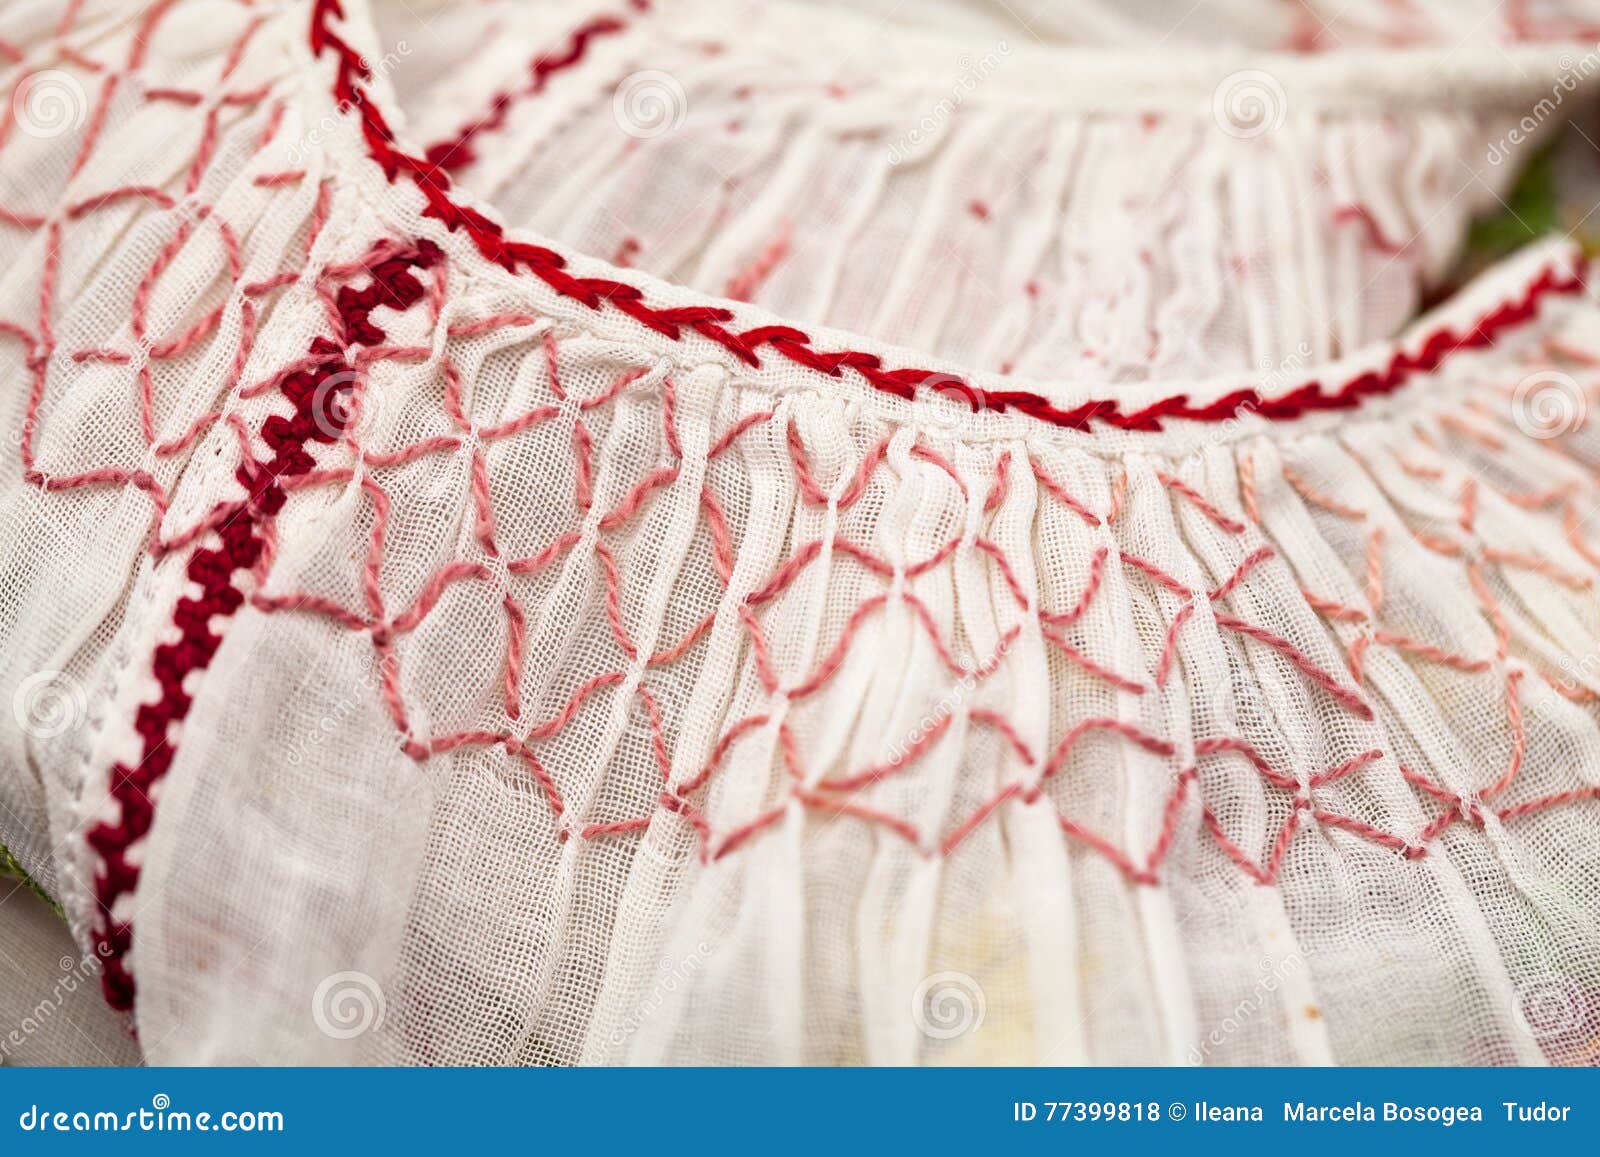 Romanian Traditional Blouse - Textures and Traditional Motifs Stock ...